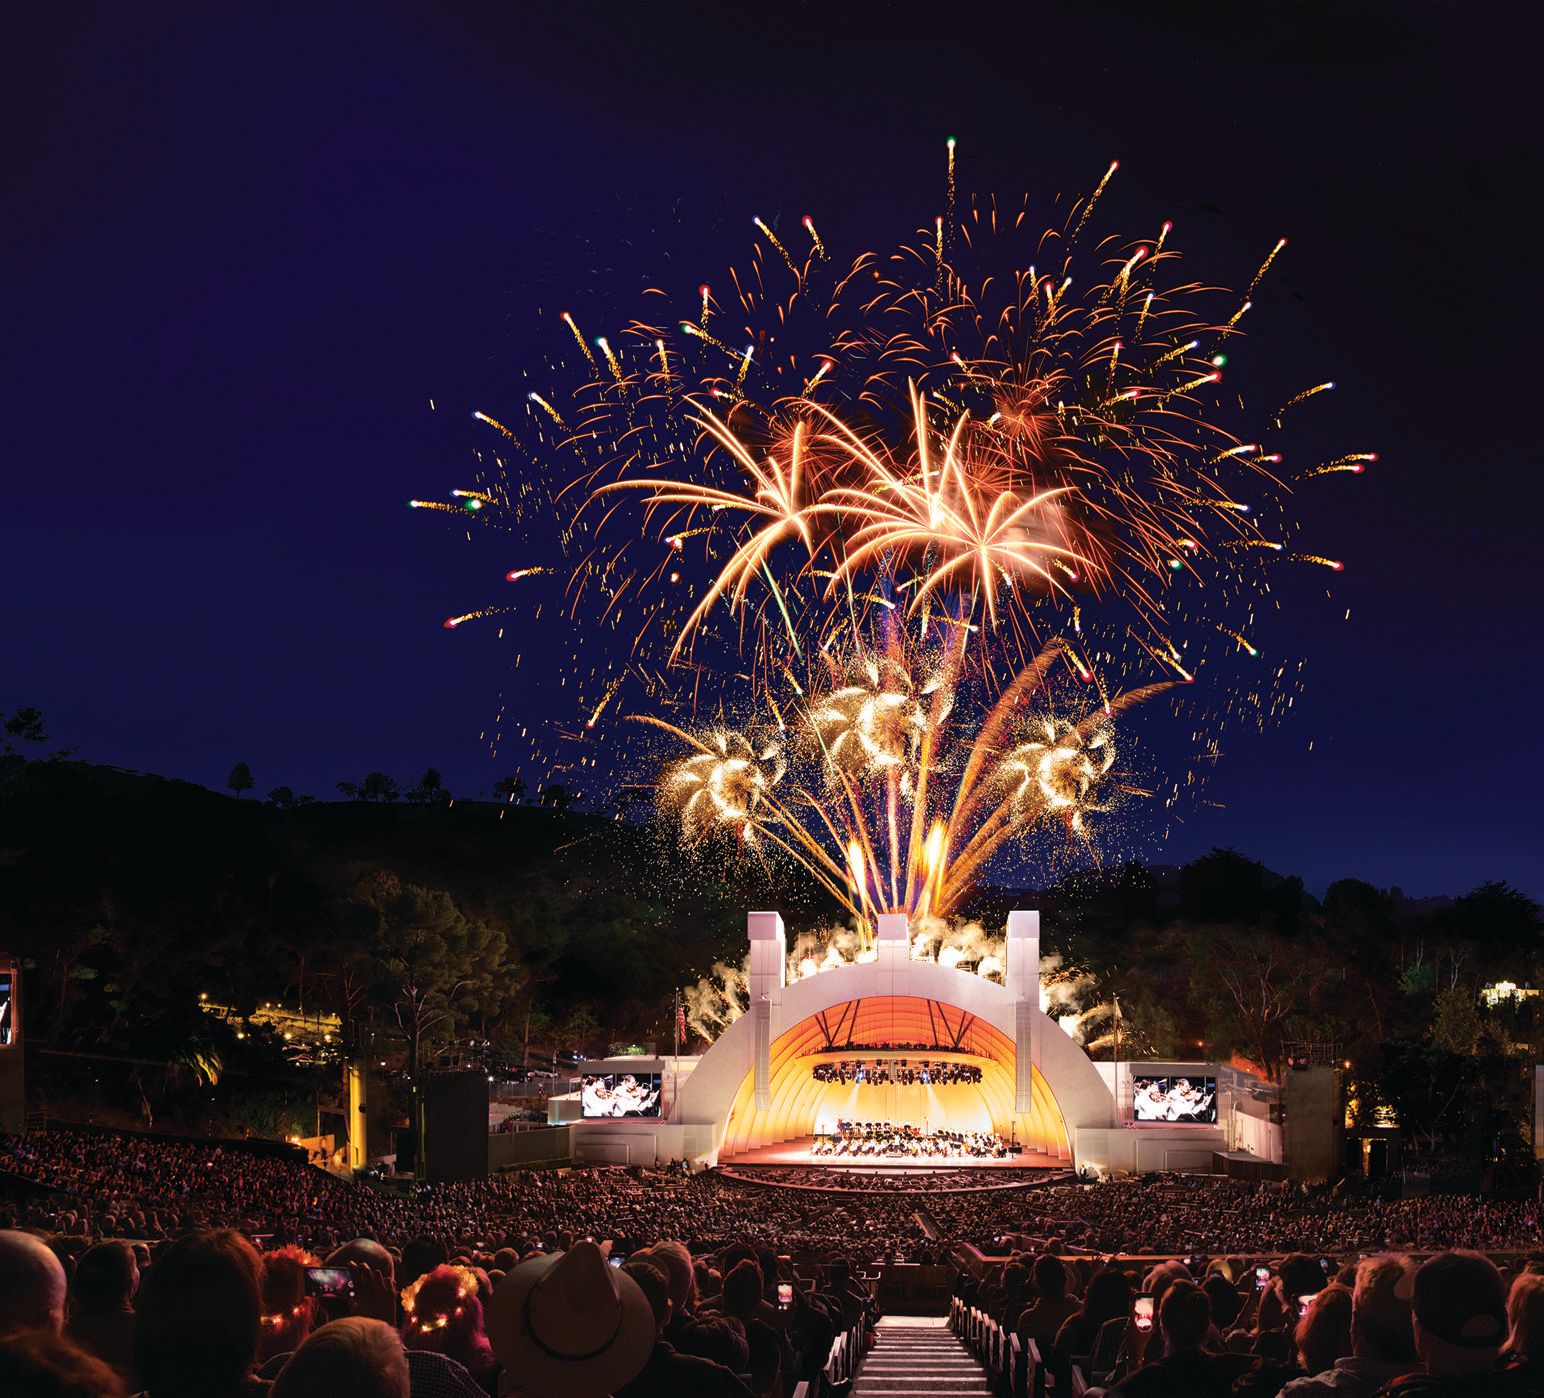 The Hollywood Bowl, pictured here in 2019, is celebrating its 100-year anniversary with an exciting lineup of performers, events and beloved traditions, including July Fourth fireworks. PHOTO COURTESY OF THE LA PHIL